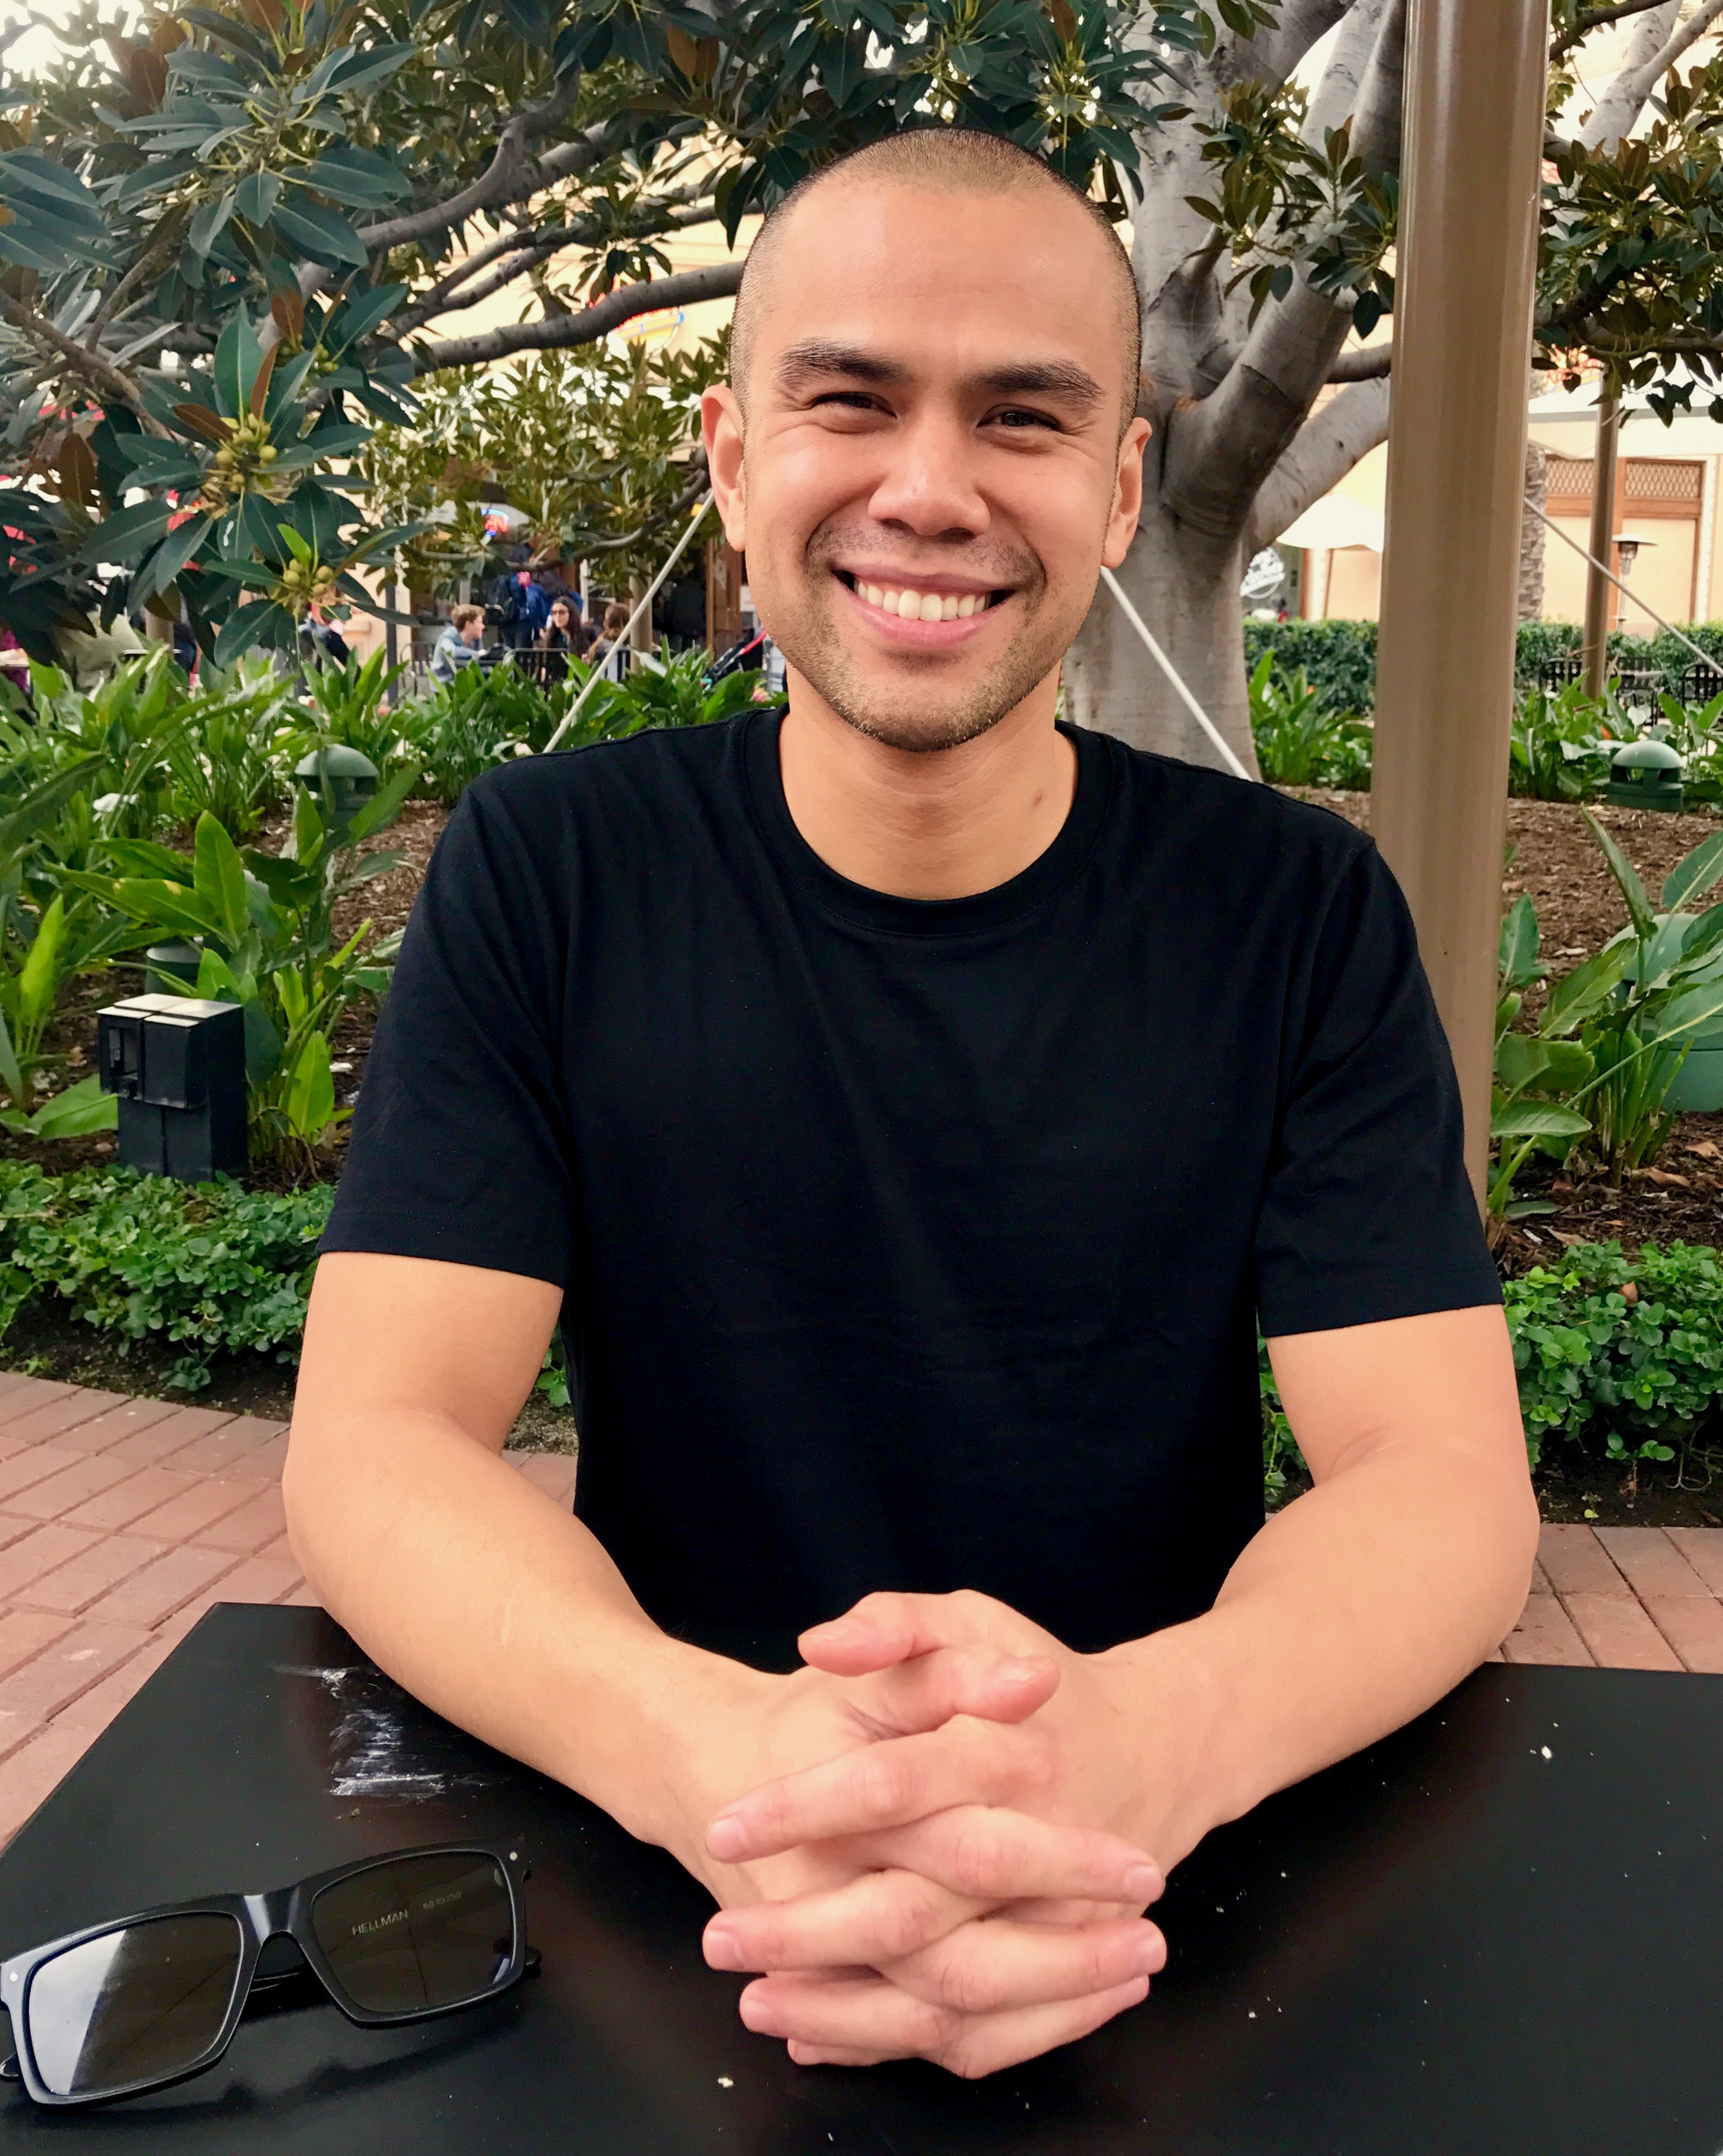 “We’re excited to be a resource for ASC, and look forward to helping people seeking asylum in the Australia and New Zealand region,” comments Ayotree Co-Founder Khoa Vu.